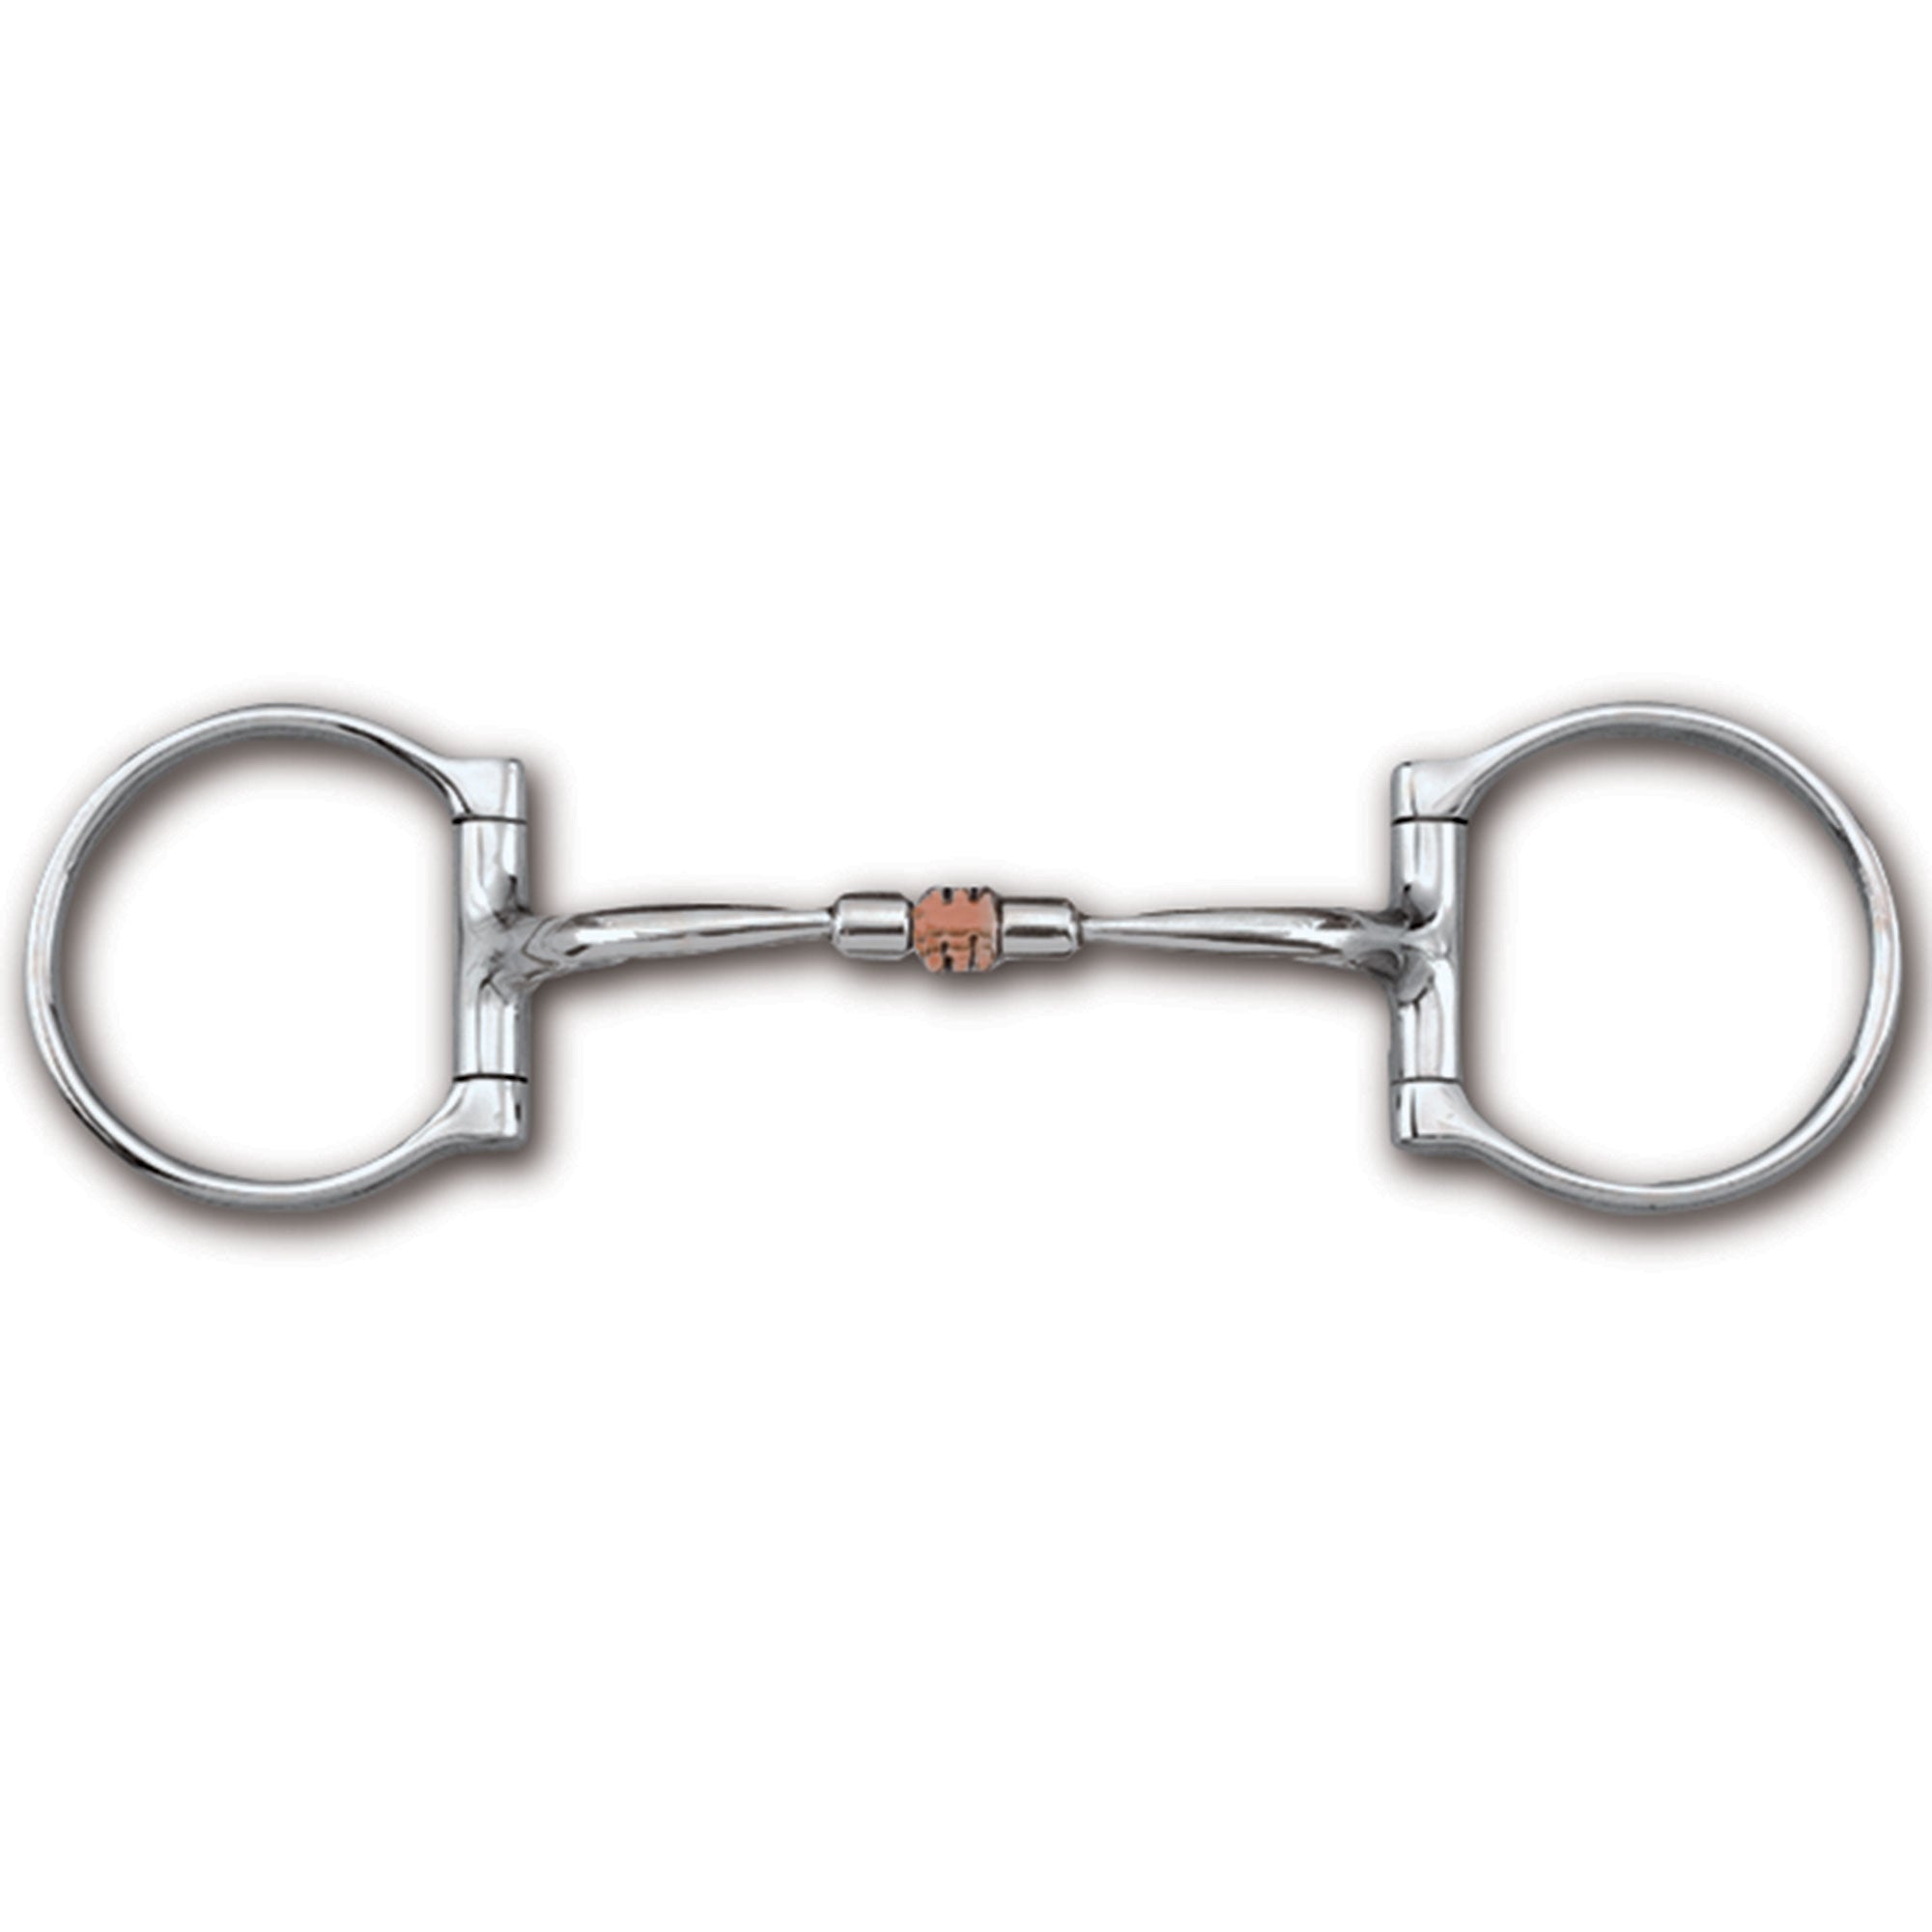 Myler Western Dee with Sweet Iron Comfort Snaffle with Copper Roller - 5